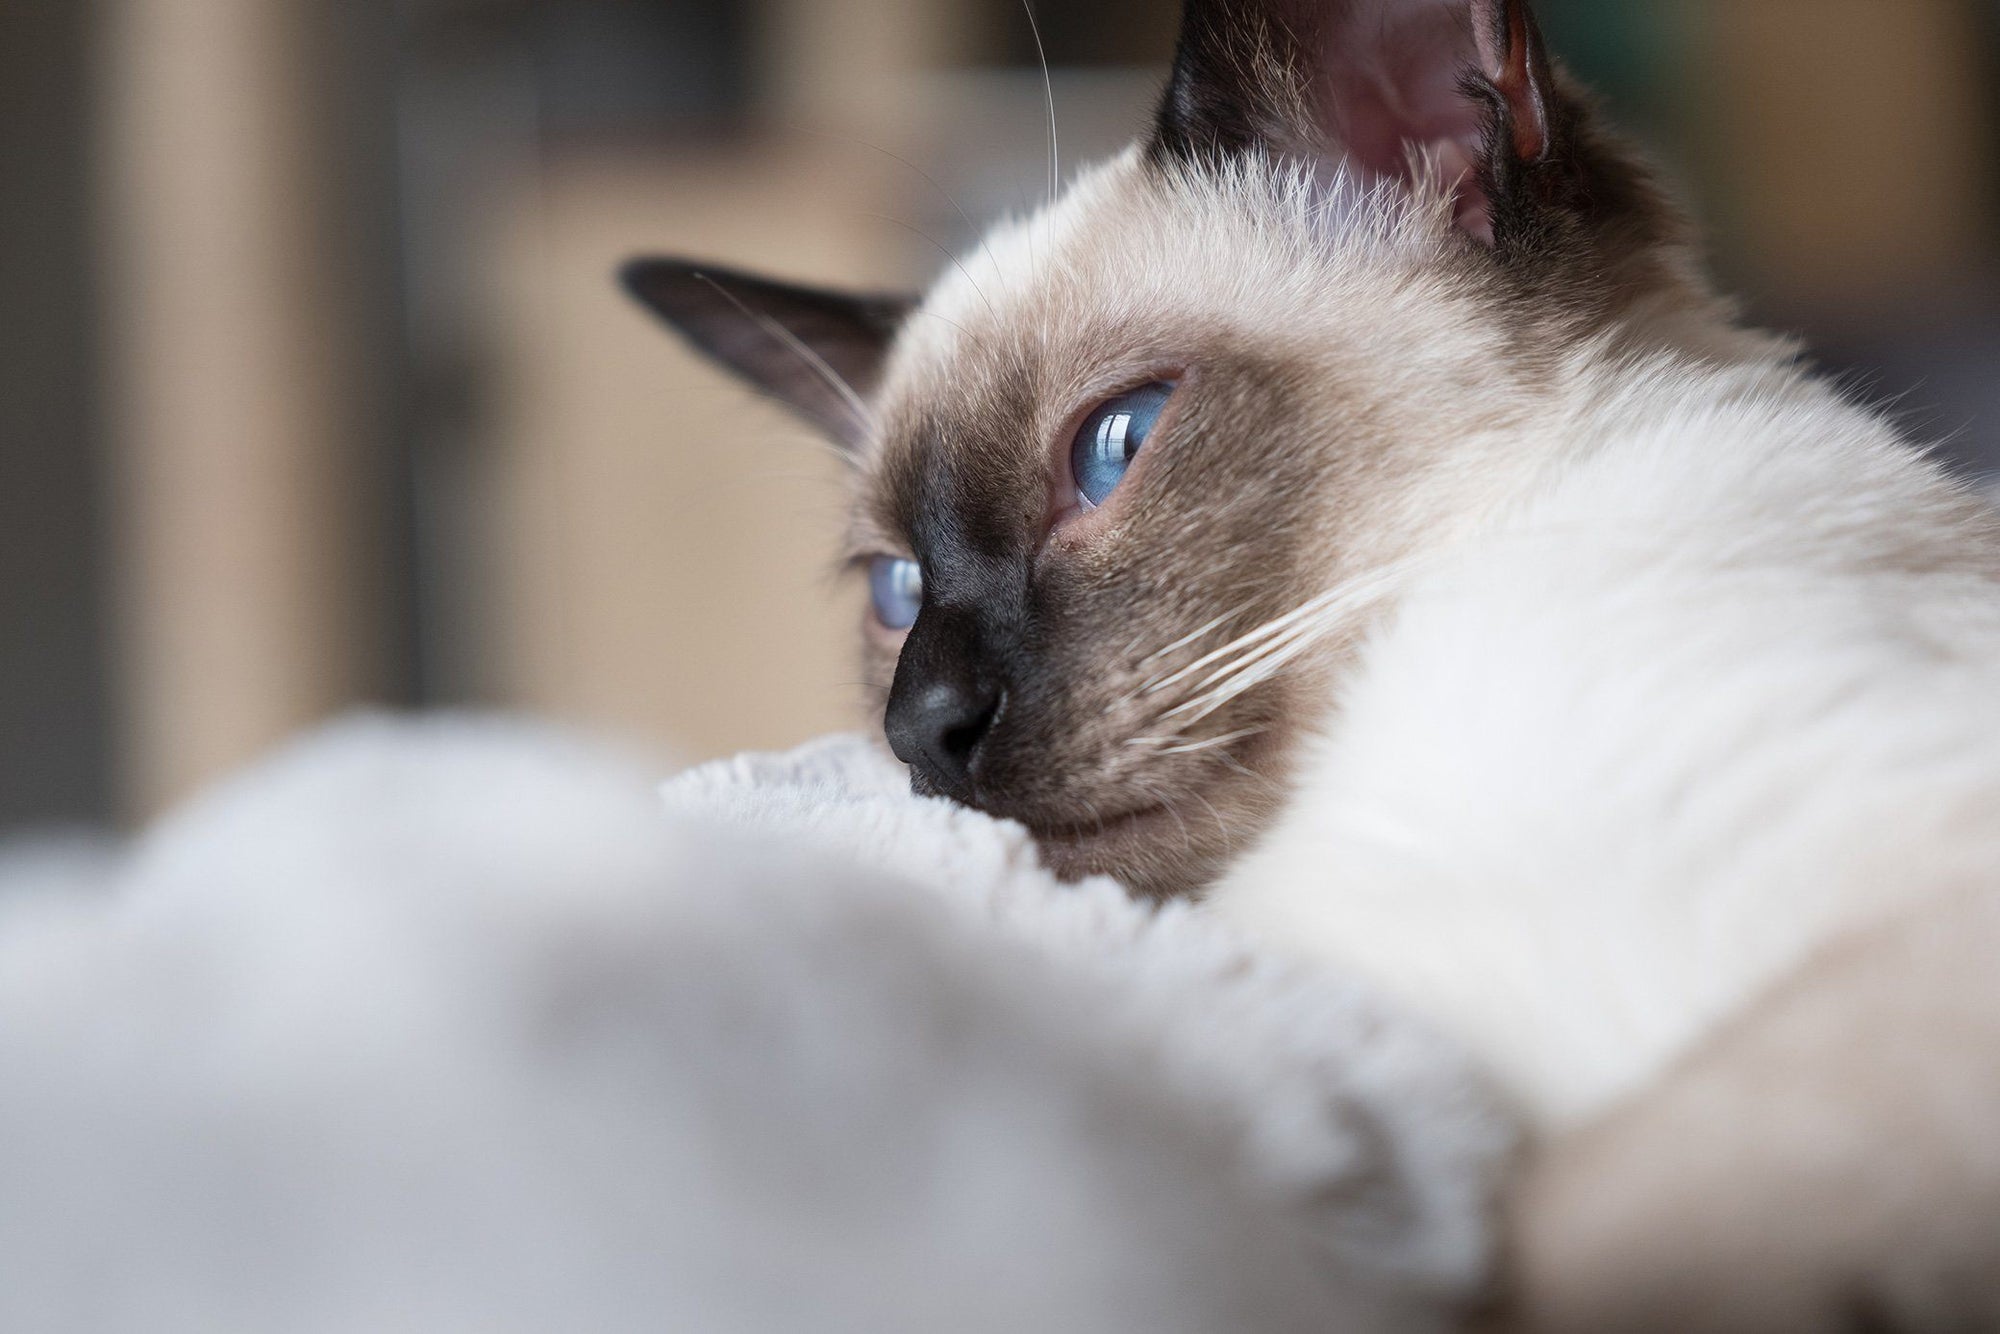 Cat Dementia: A Very Real & Scary Health Condition Pet Parents Should Watch For